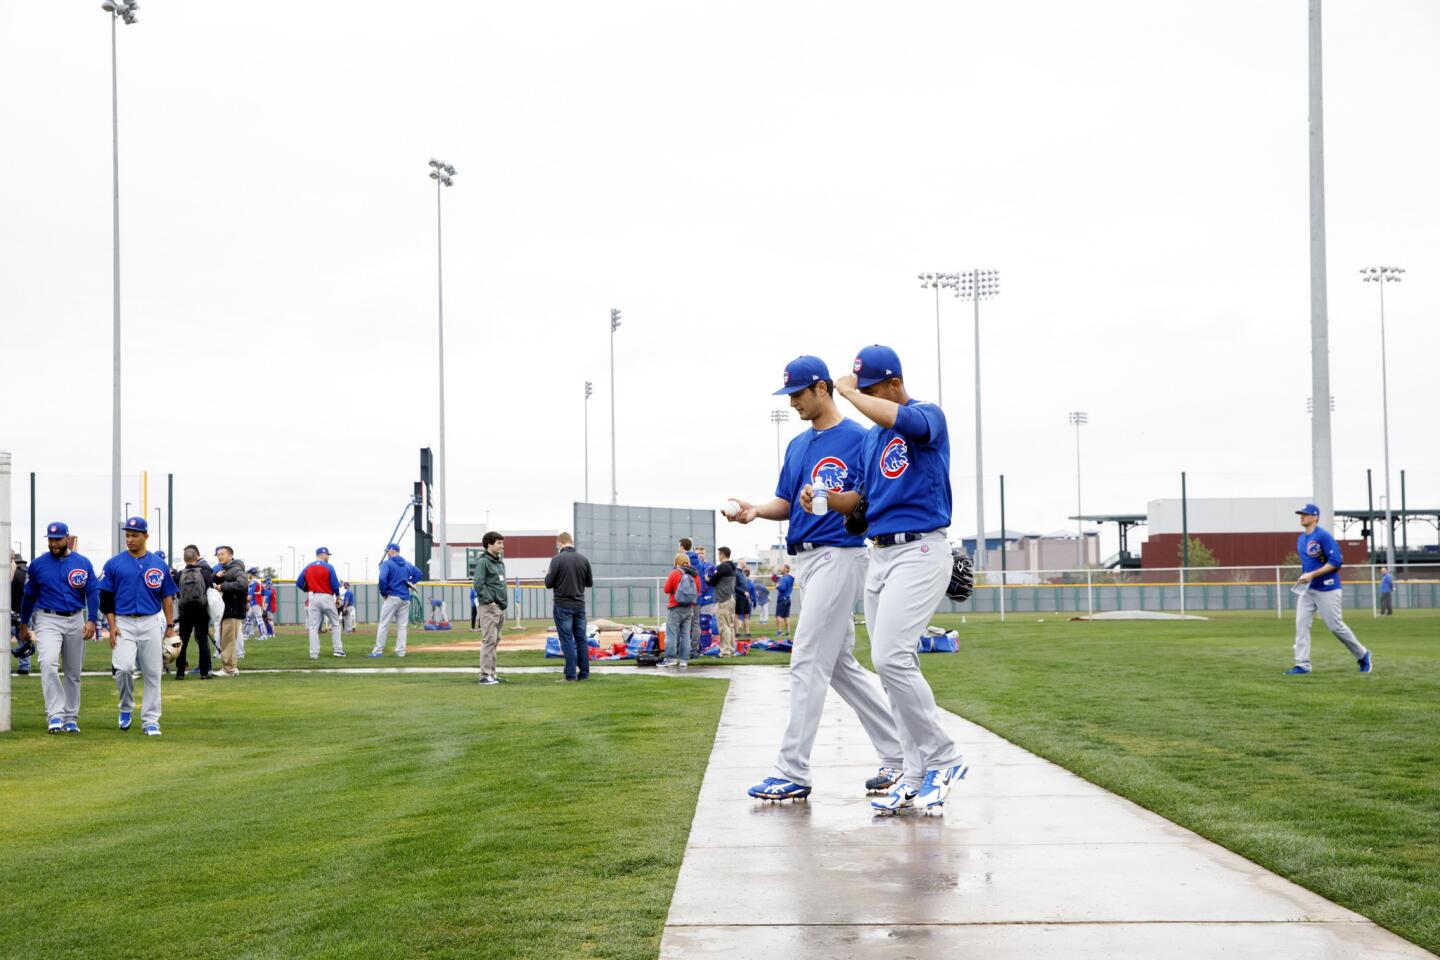 chi-ct-ct-cubs-spring-training-0215-62-ct0063681102-20180215